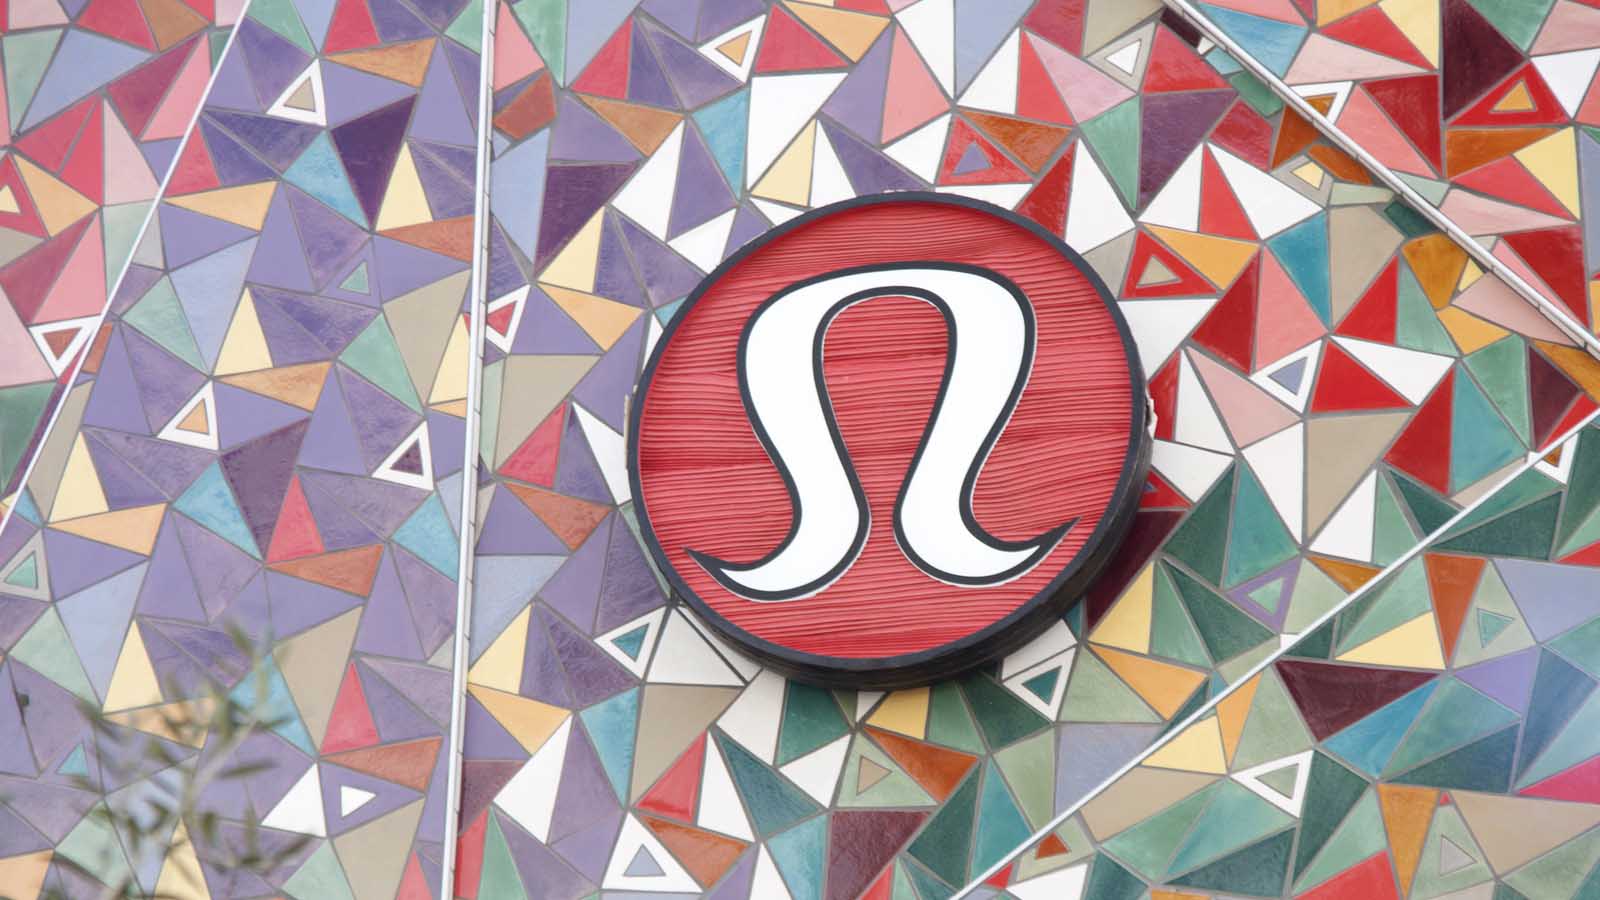 Lululemon Shares Jump Ahead of Its Move to the S&P 500